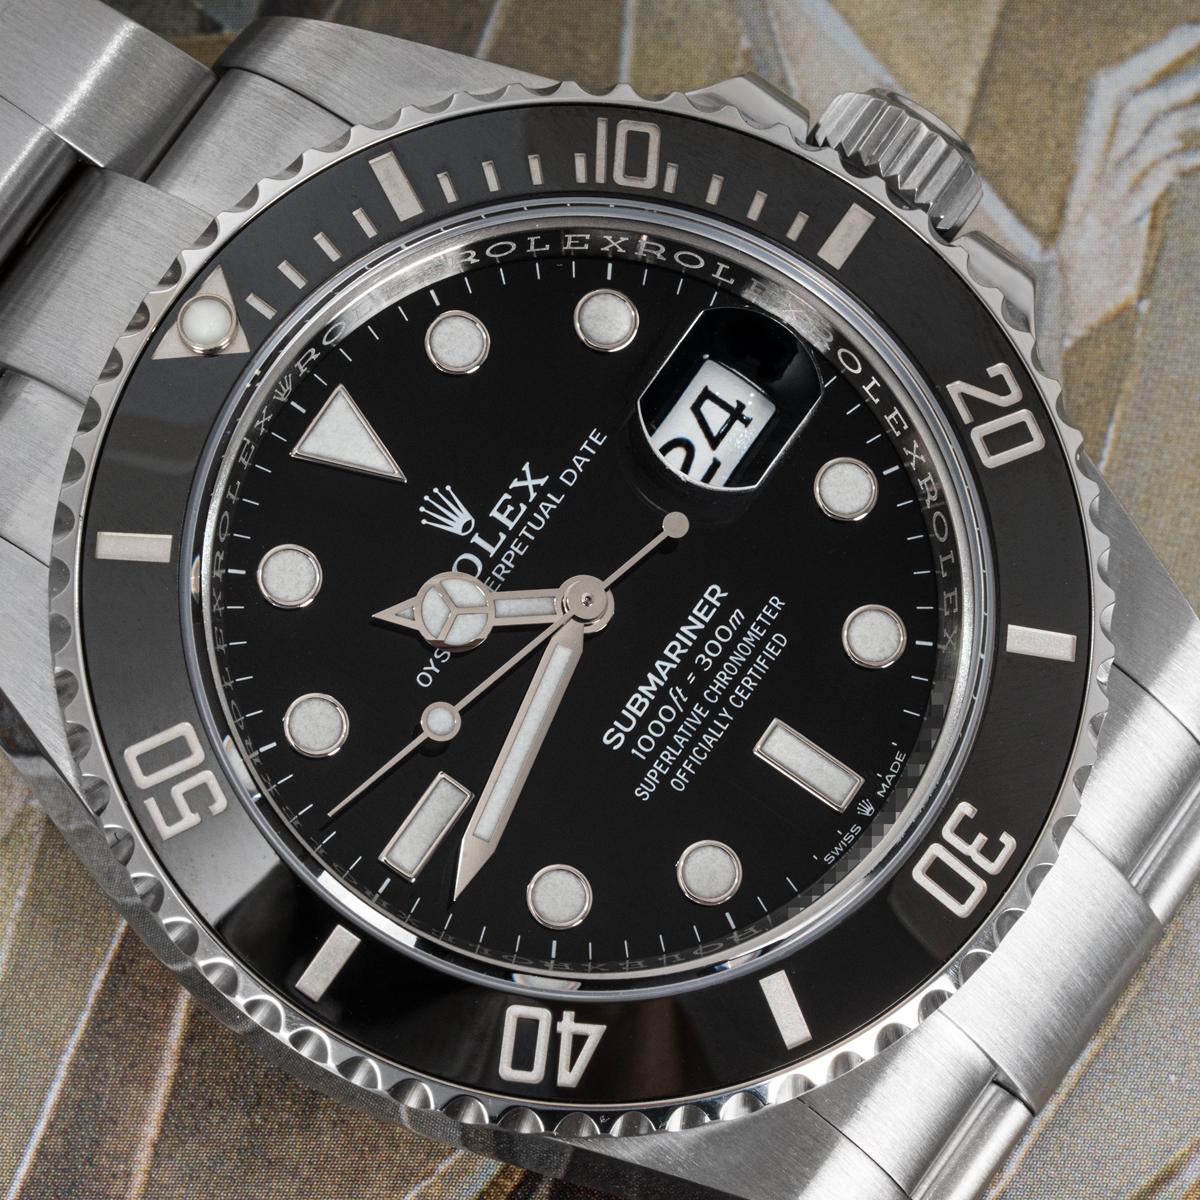 An unworn 41mm Submariner Date in Oystersteel by Rolex. Featuring a black dial and a black ceramic unidirectional rotatable bezel with 60-minute graduations coated in platinum.

Fitted with a scratch-resistant sapphire crystal, a self-winding